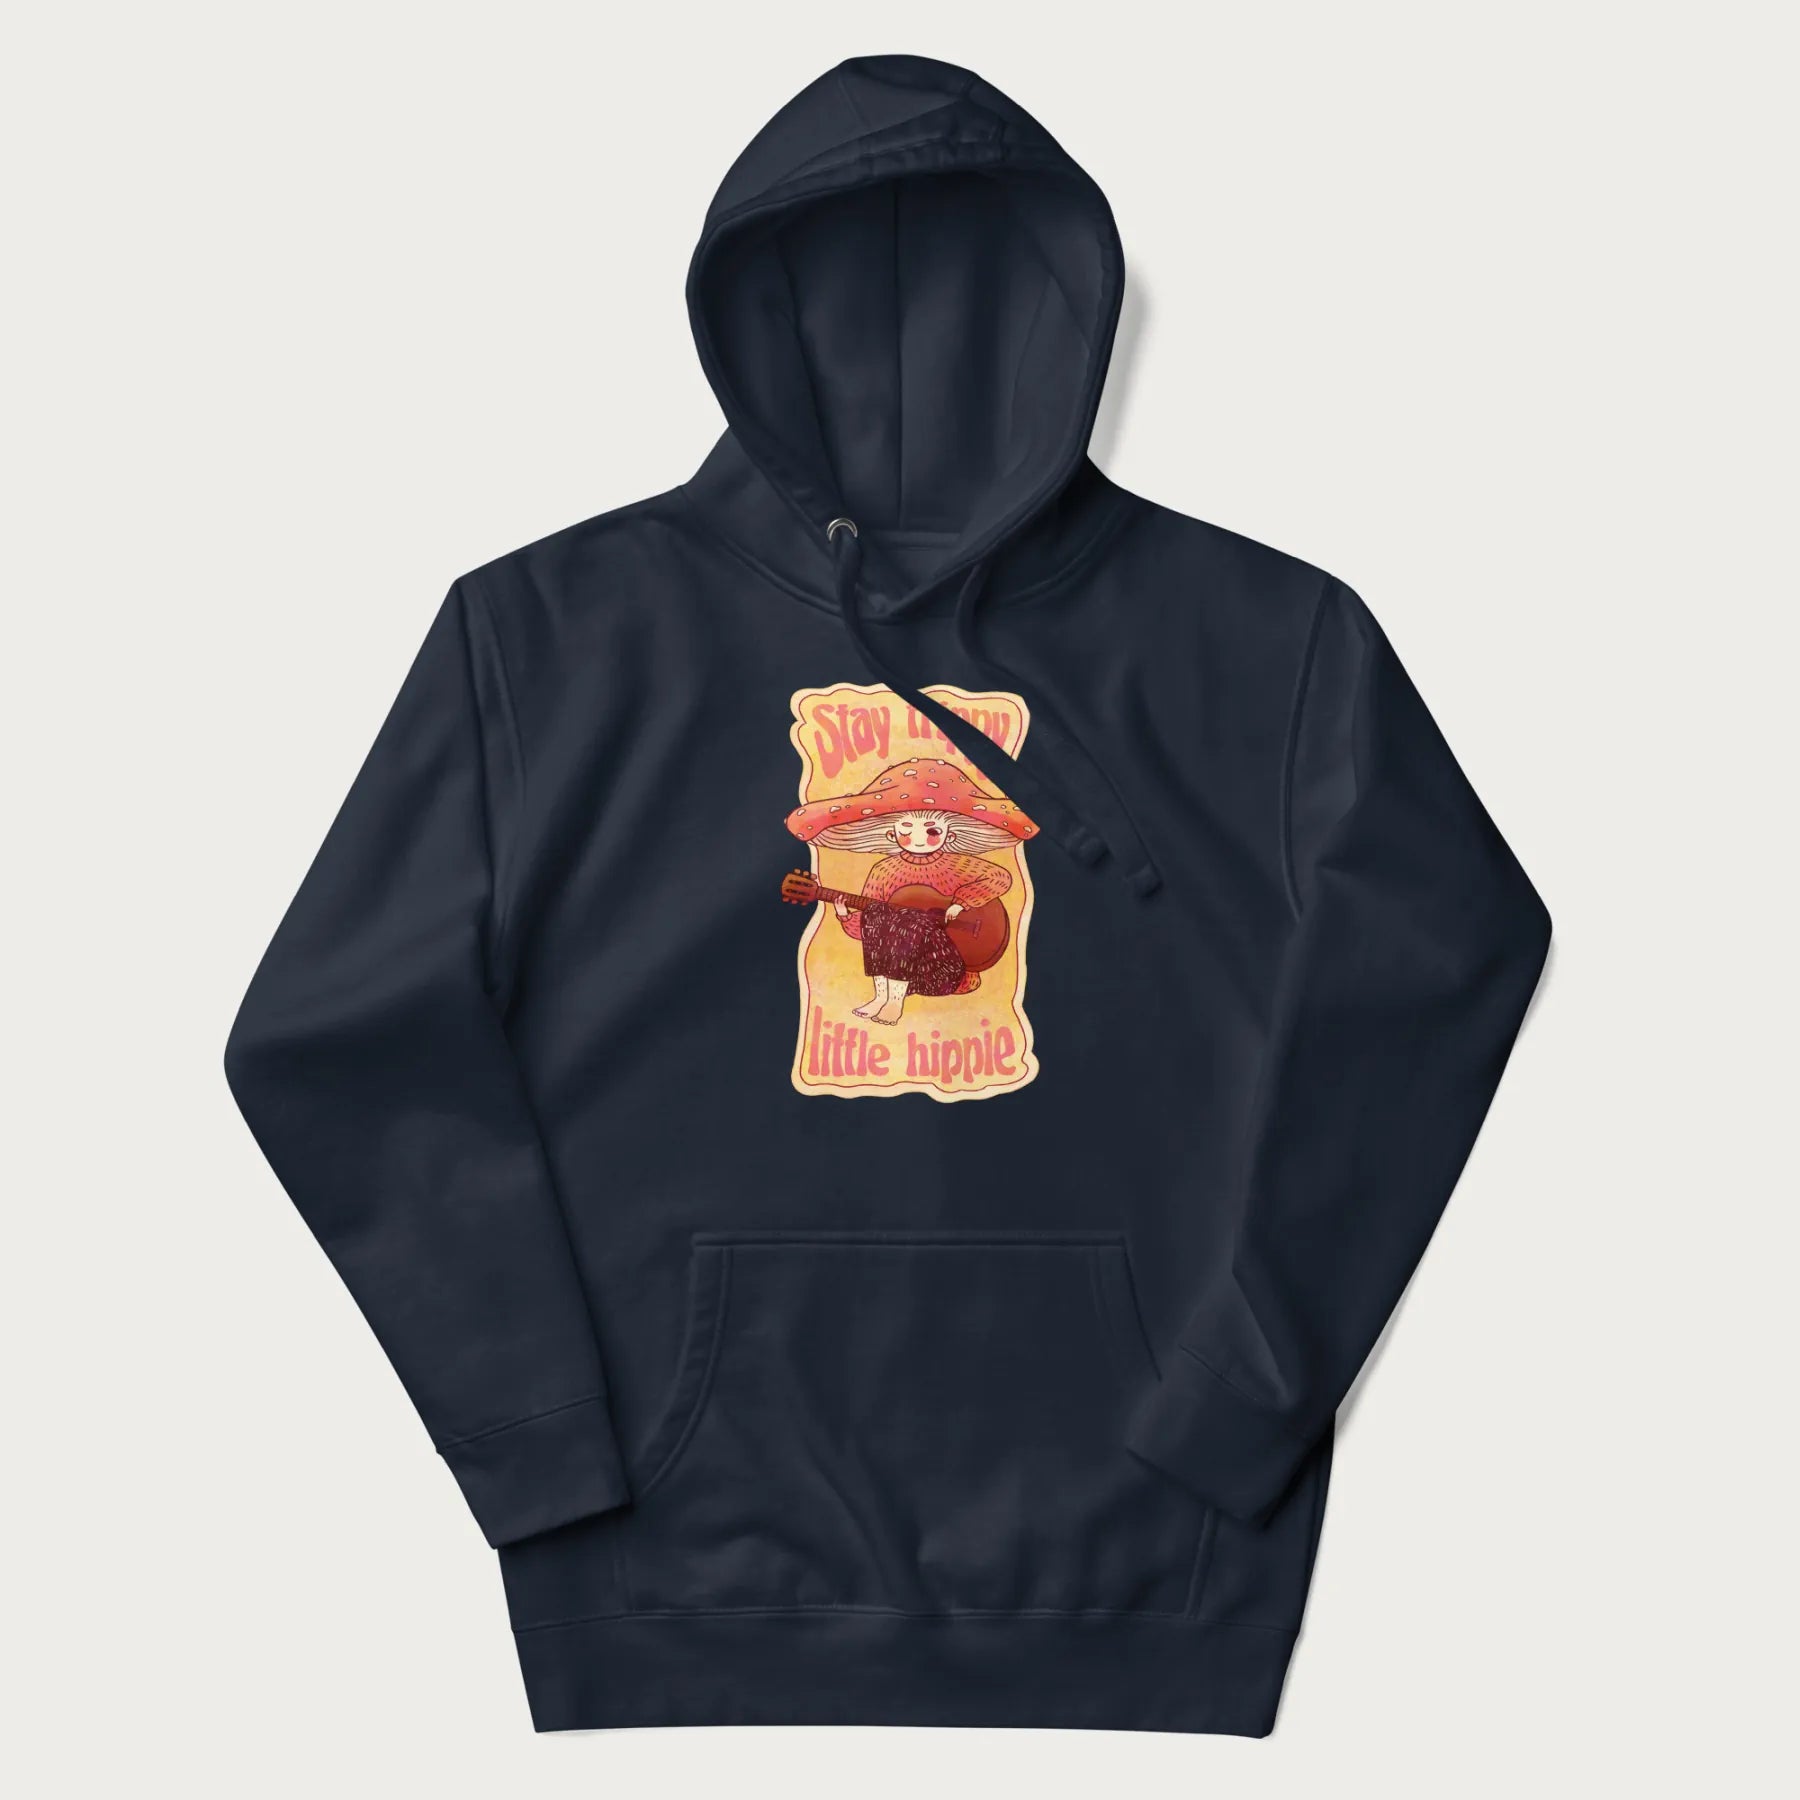 Navy blue hoodie with a graphic of a character with a mushroom cap playing a guitar and the text 'Stay Trippy Little Hippie.'